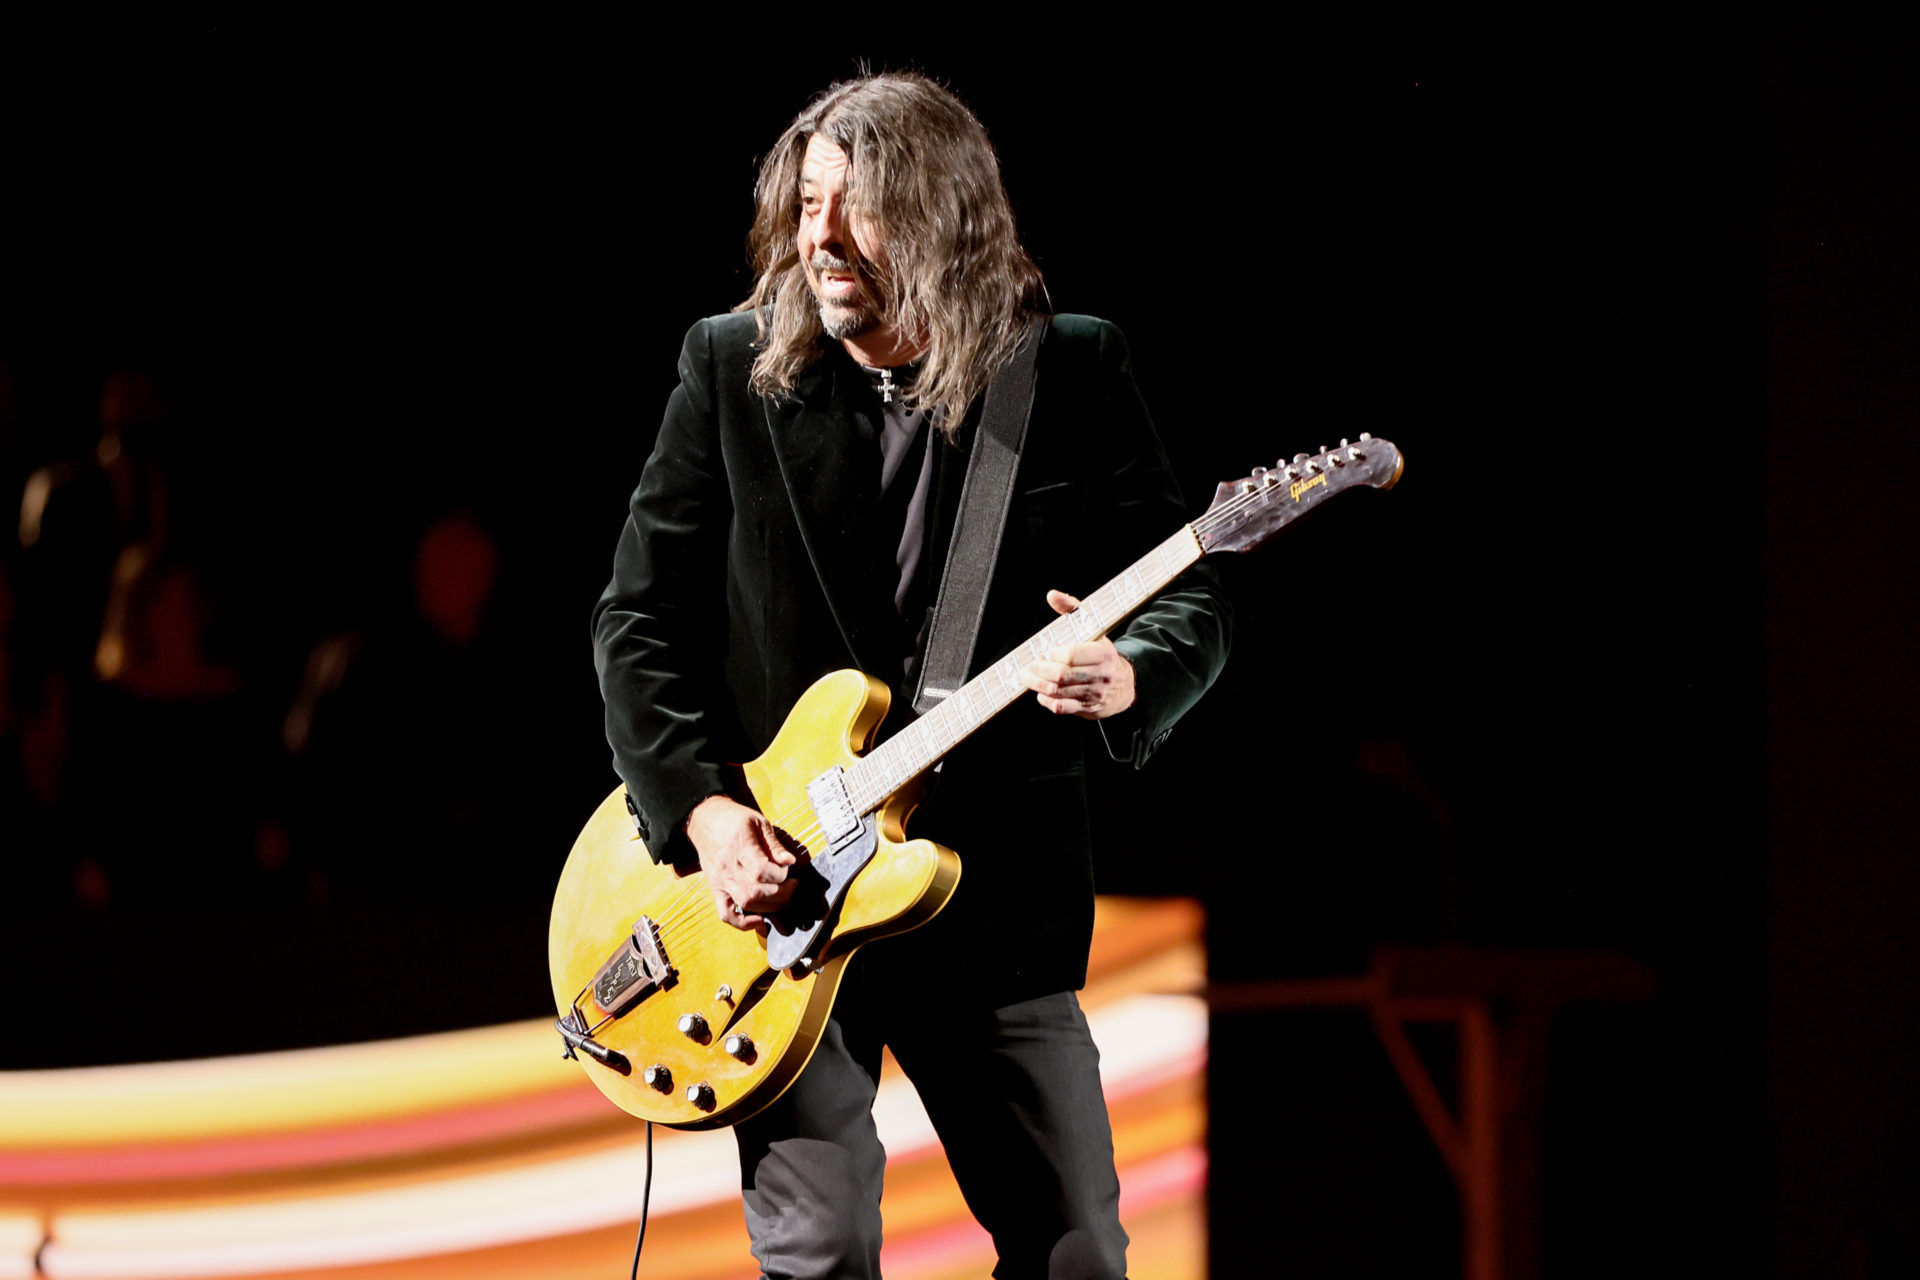 37th Annual Rock & Roll Hall Of Fame Induction Ceremony - Inside